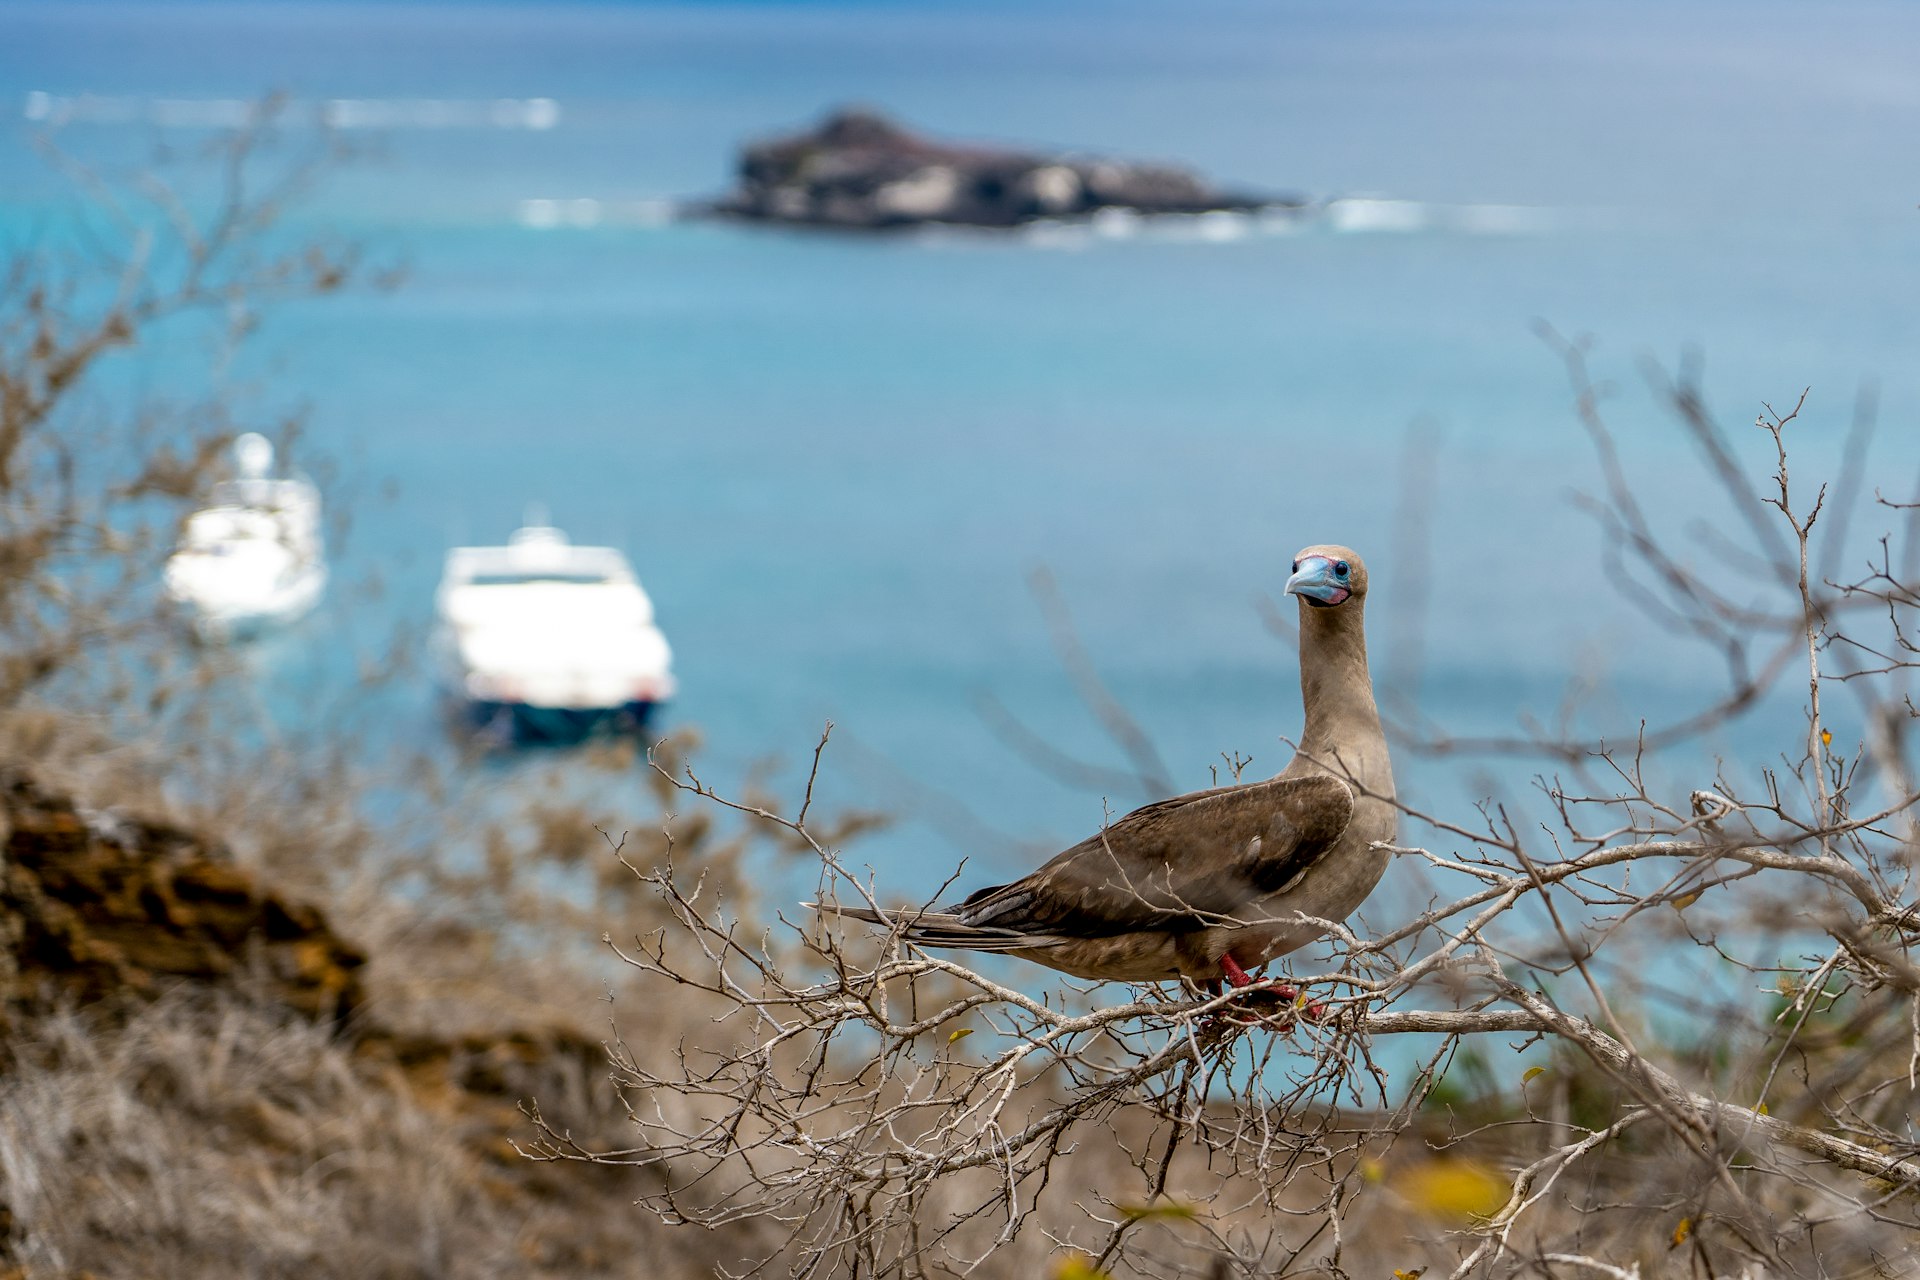 A bird rests on a brand in the Galapagos, ocean and boats in the background